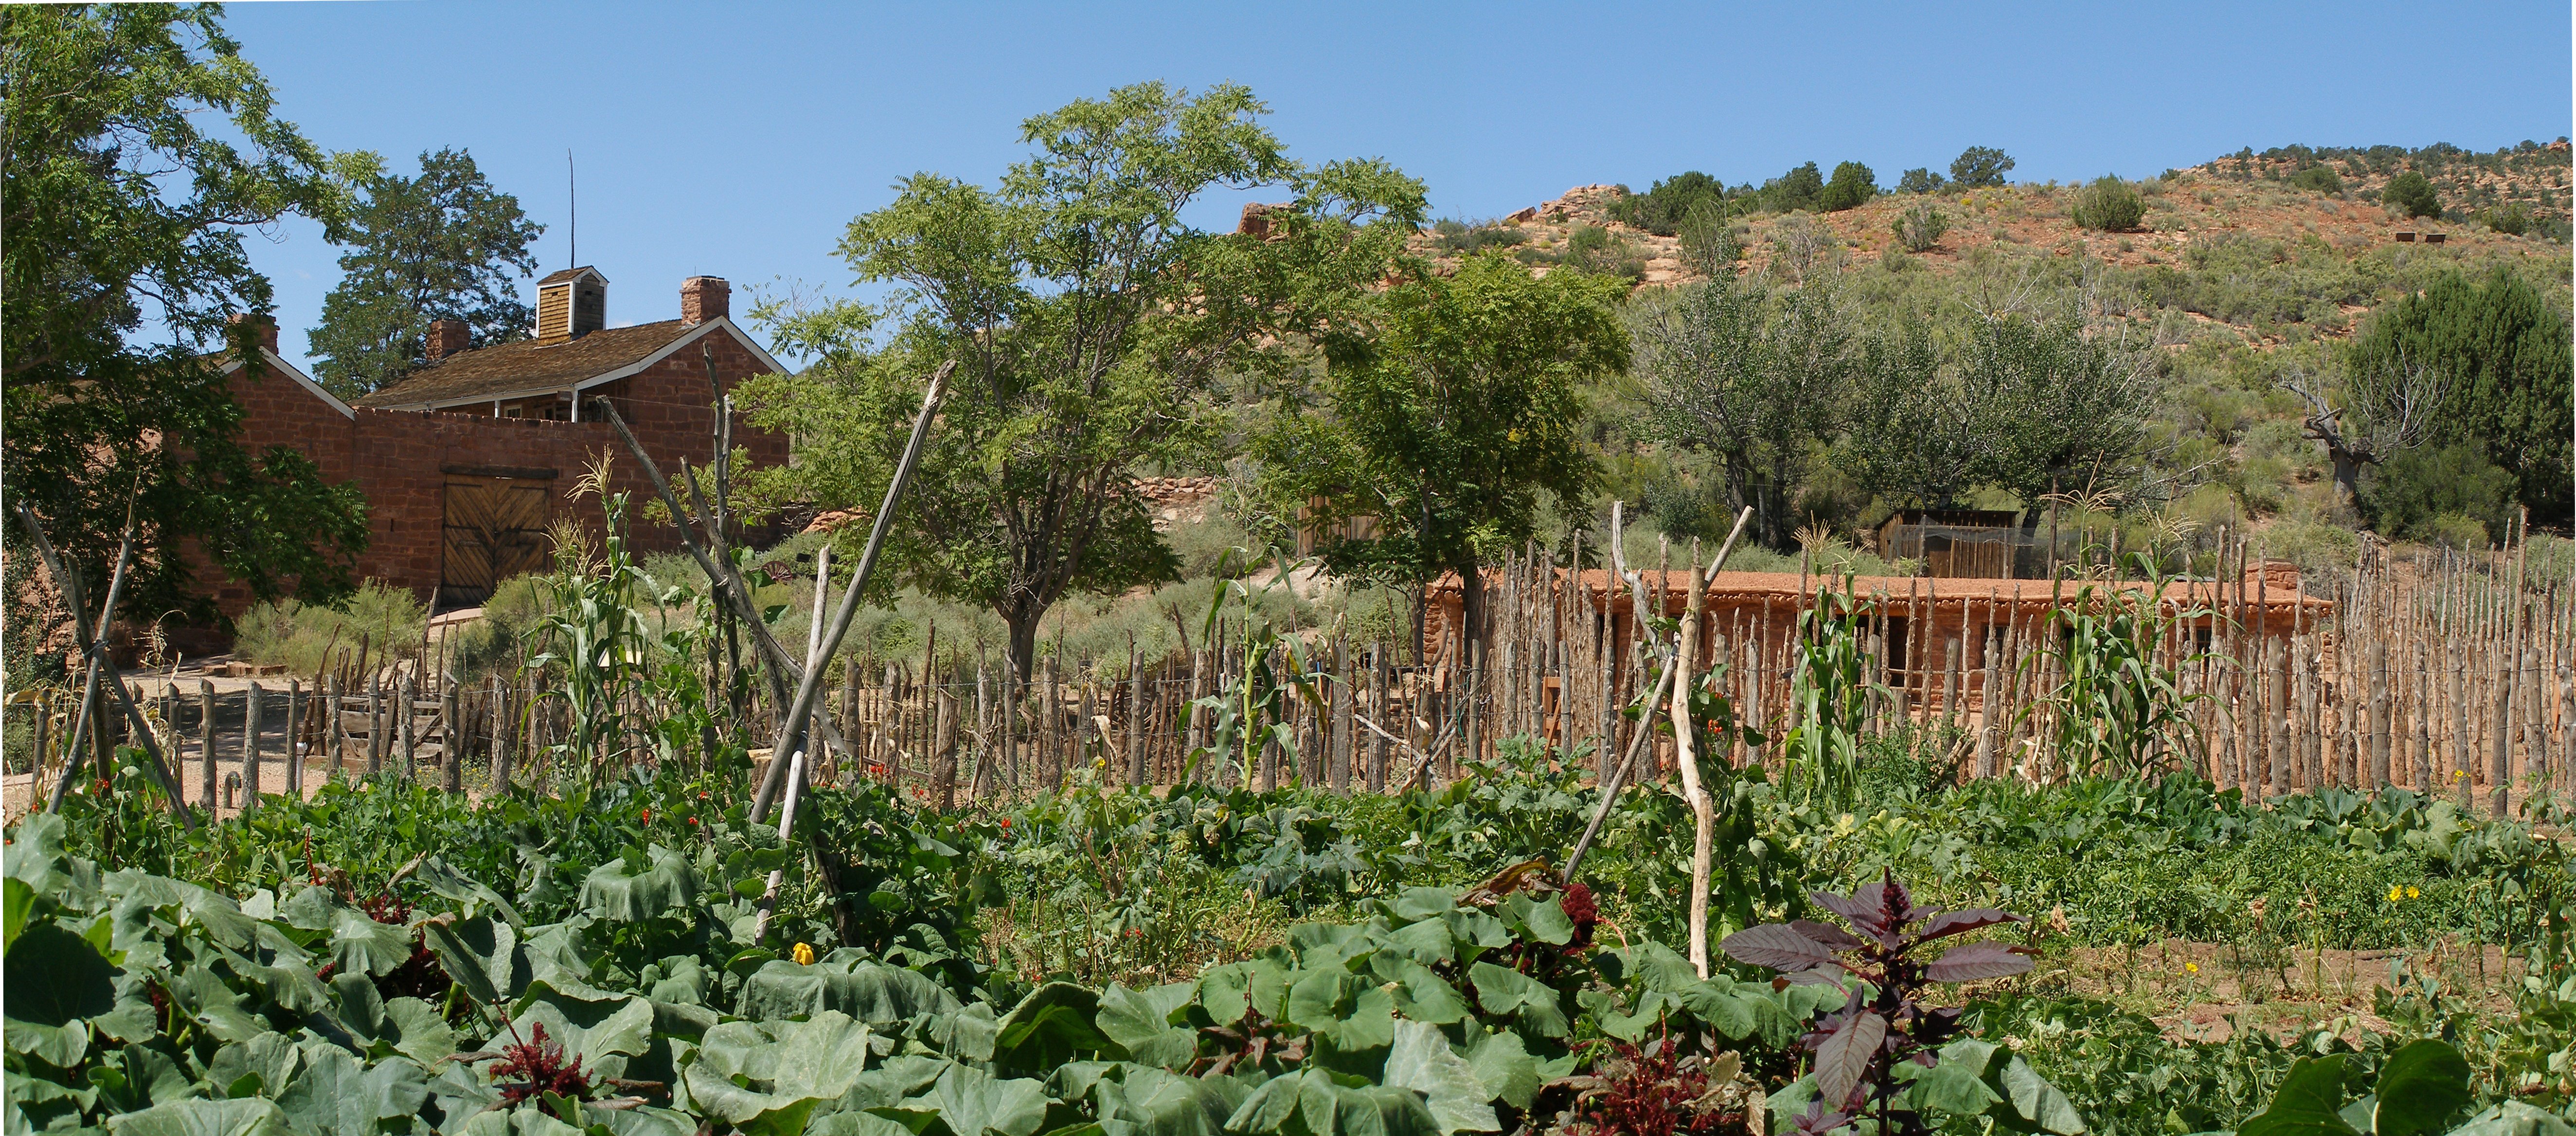 A lush garden filled with settler and native crops grows in front of a sandstone fort